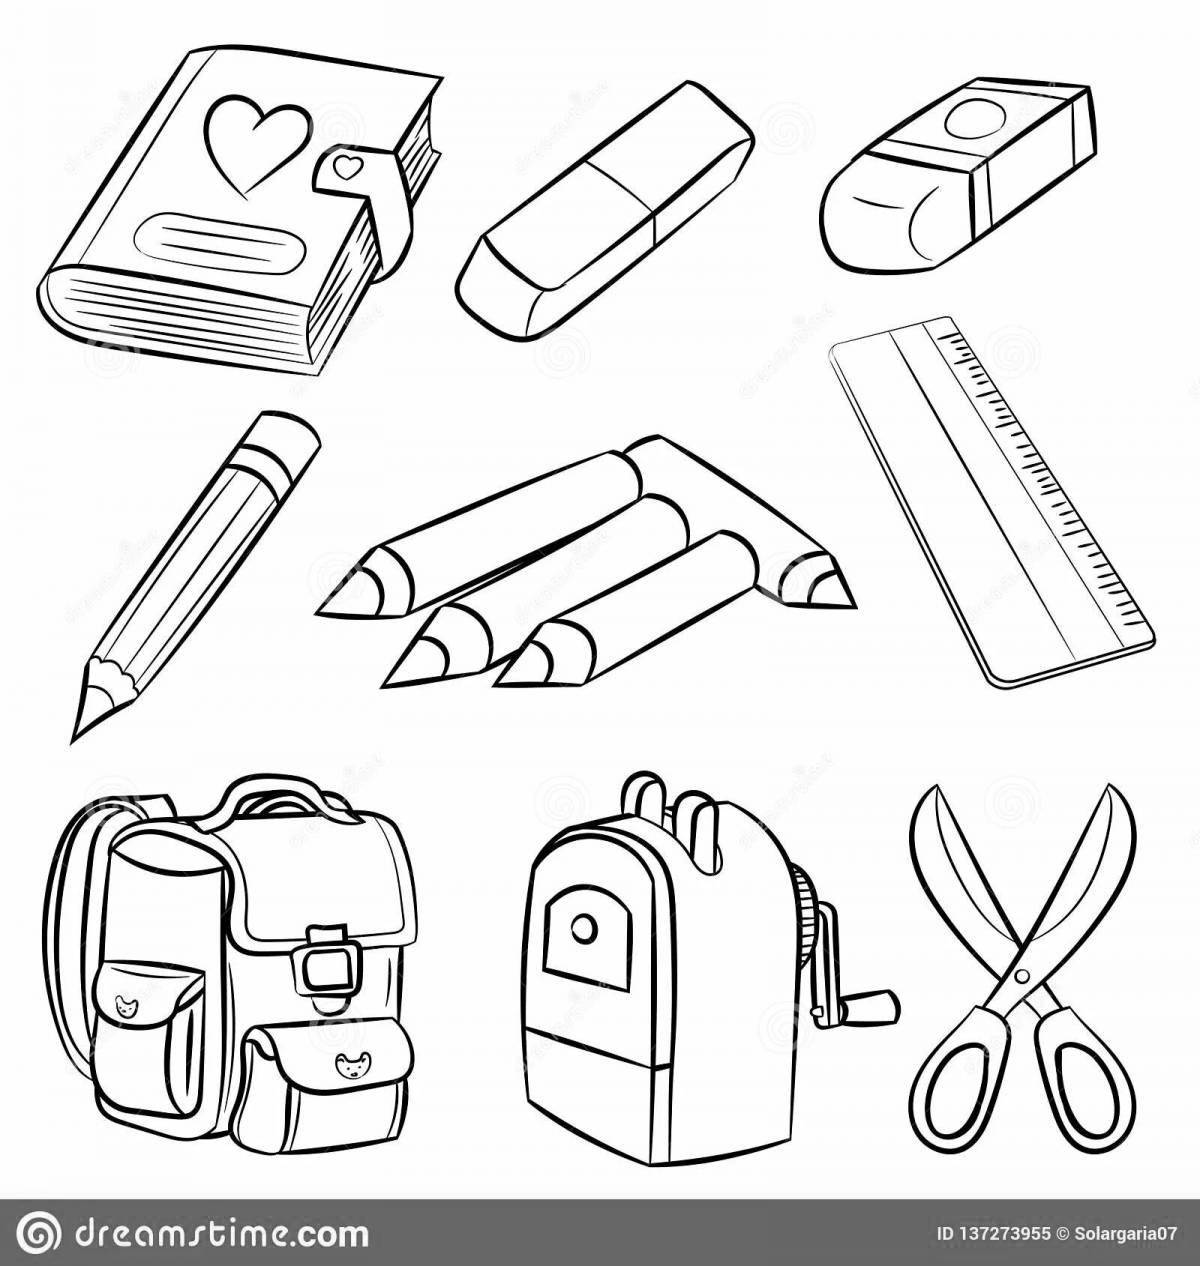 Colorful school subjects coloring page